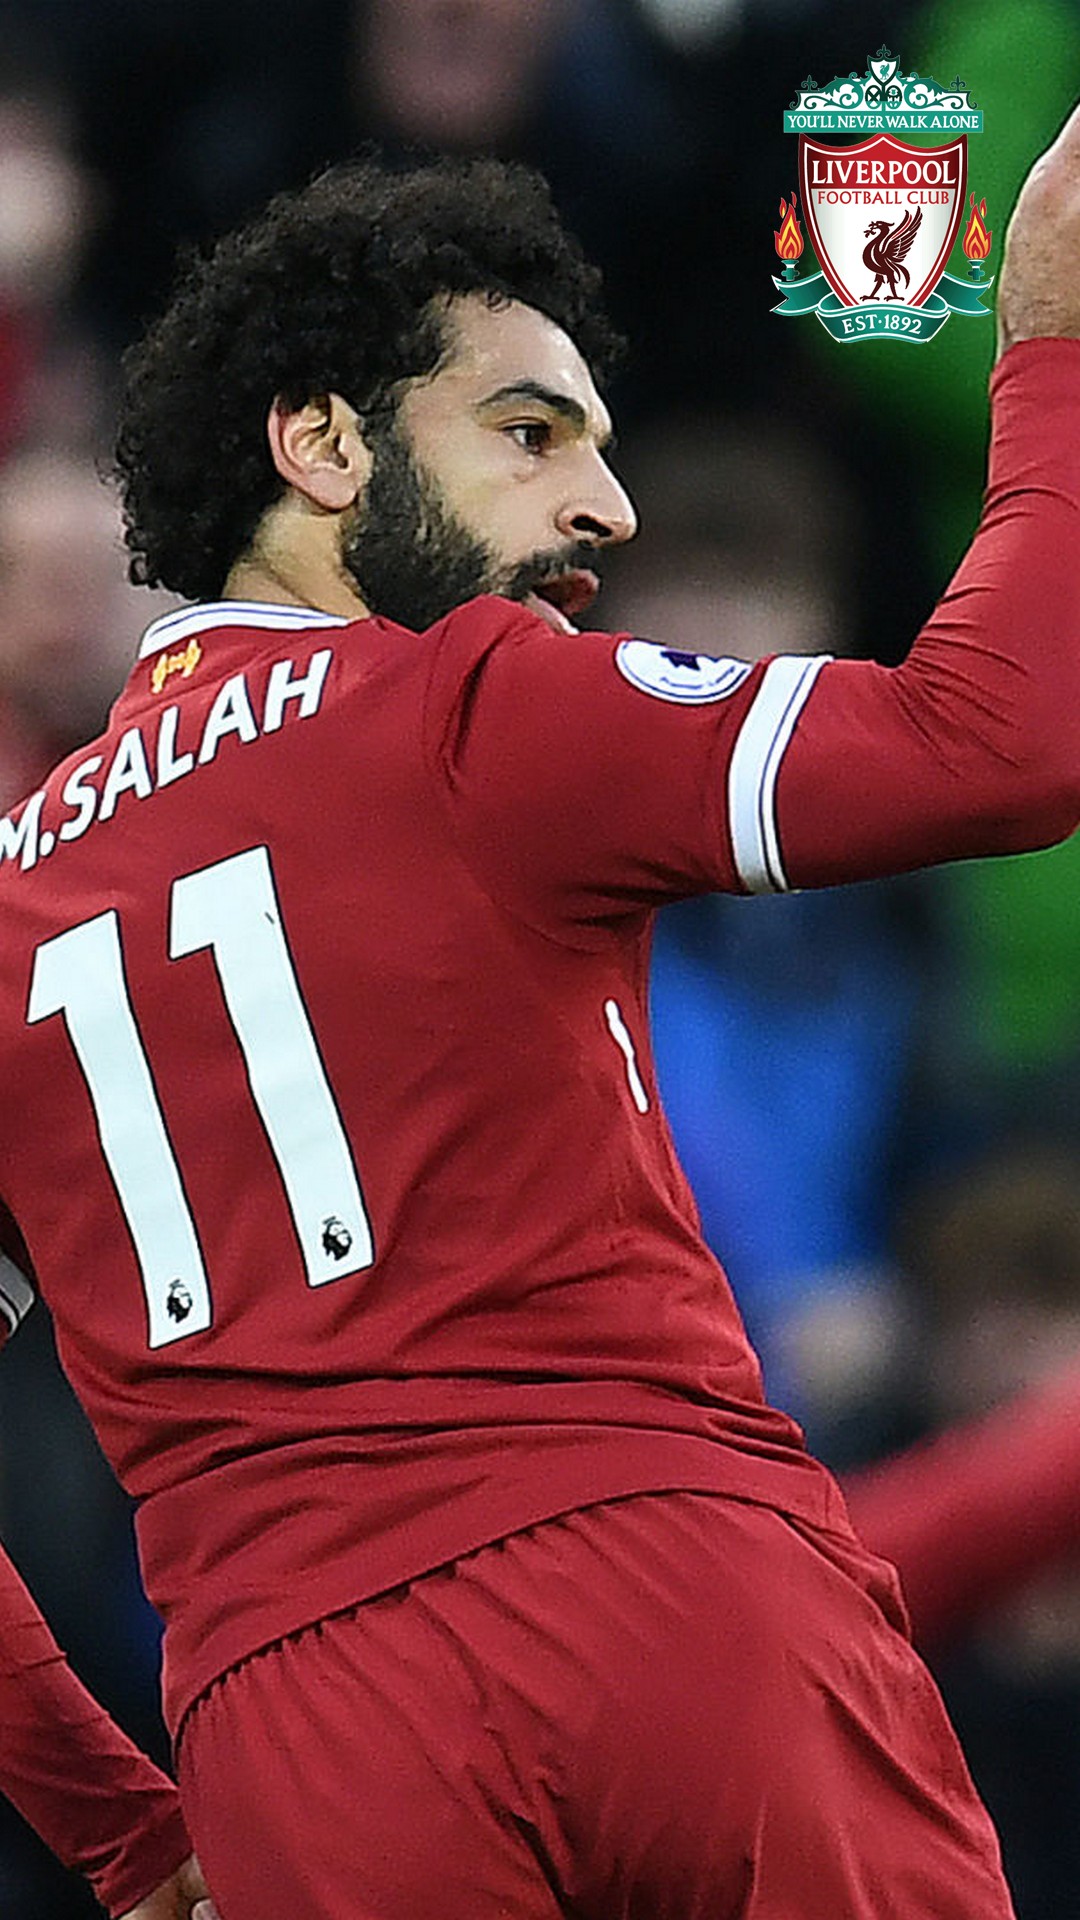 iPhone X Wallpaper Mo Salah with image resolution 1080x1920 pixel. You can make this wallpaper for your iPhone 5, 6, 7, 8, X backgrounds, Mobile Screensaver, or iPad Lock Screen